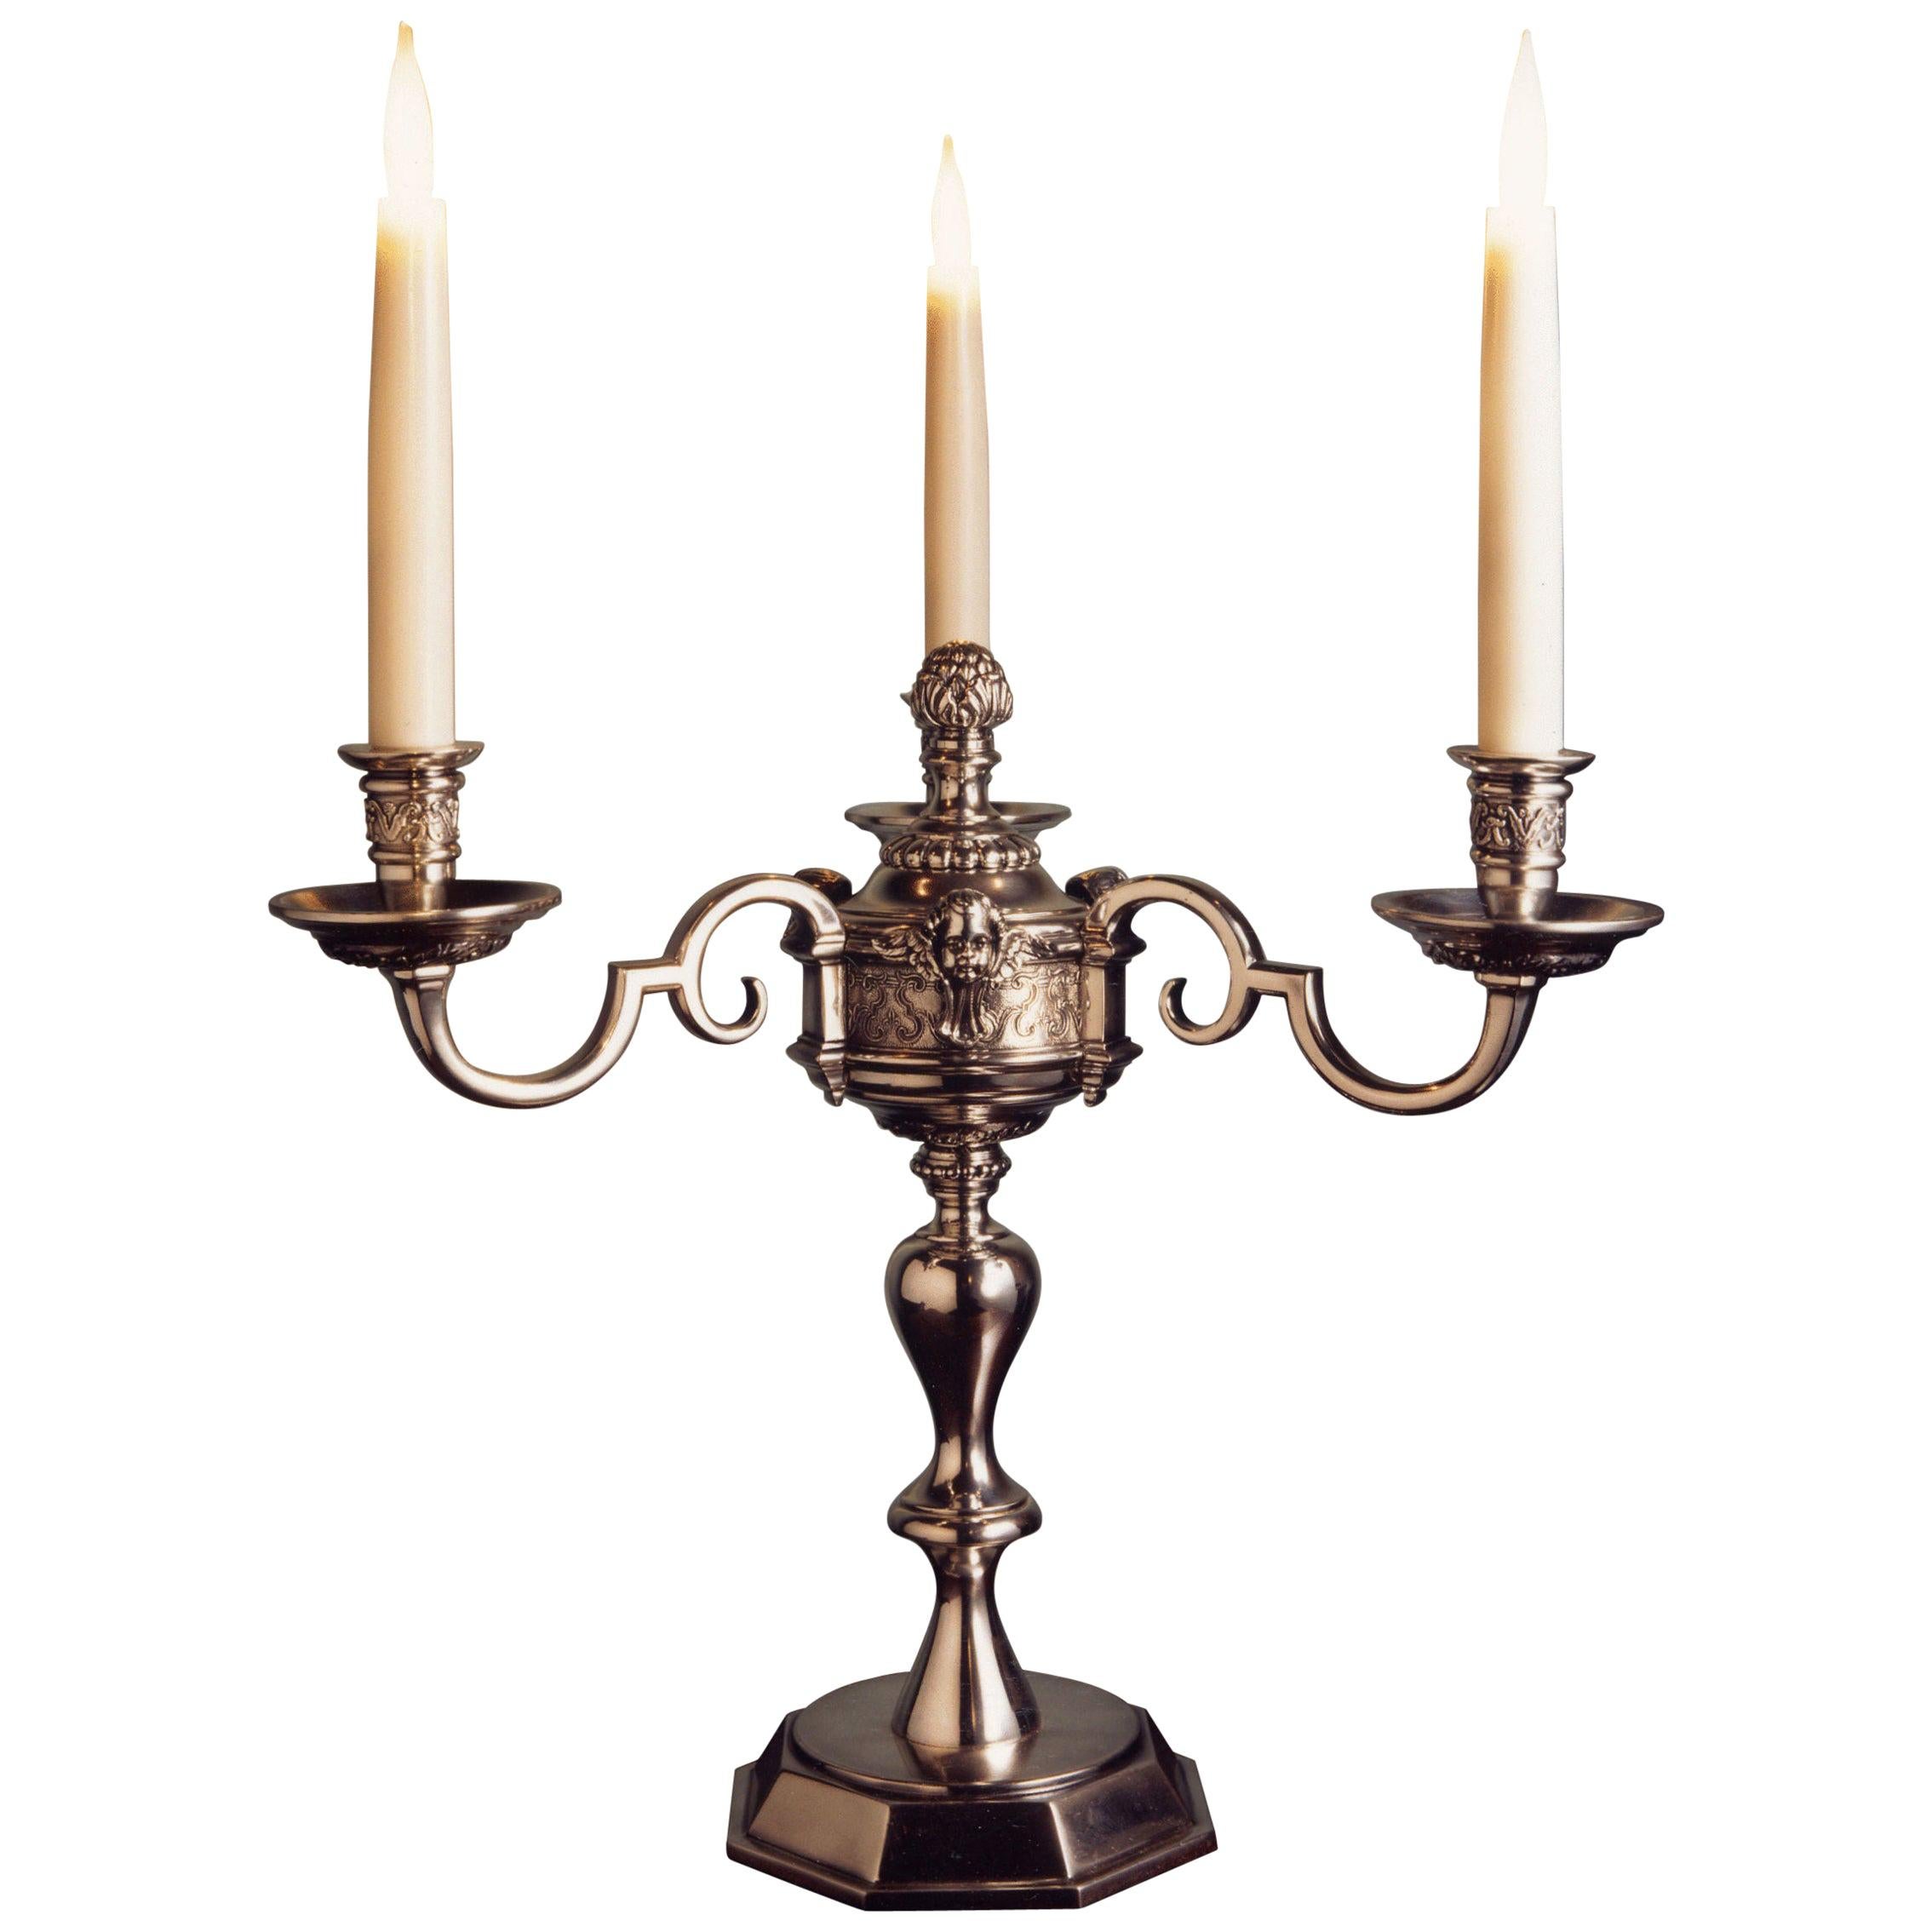 Candelabra, 20th Century, English, Charles II Style, Silver Plated, Knole